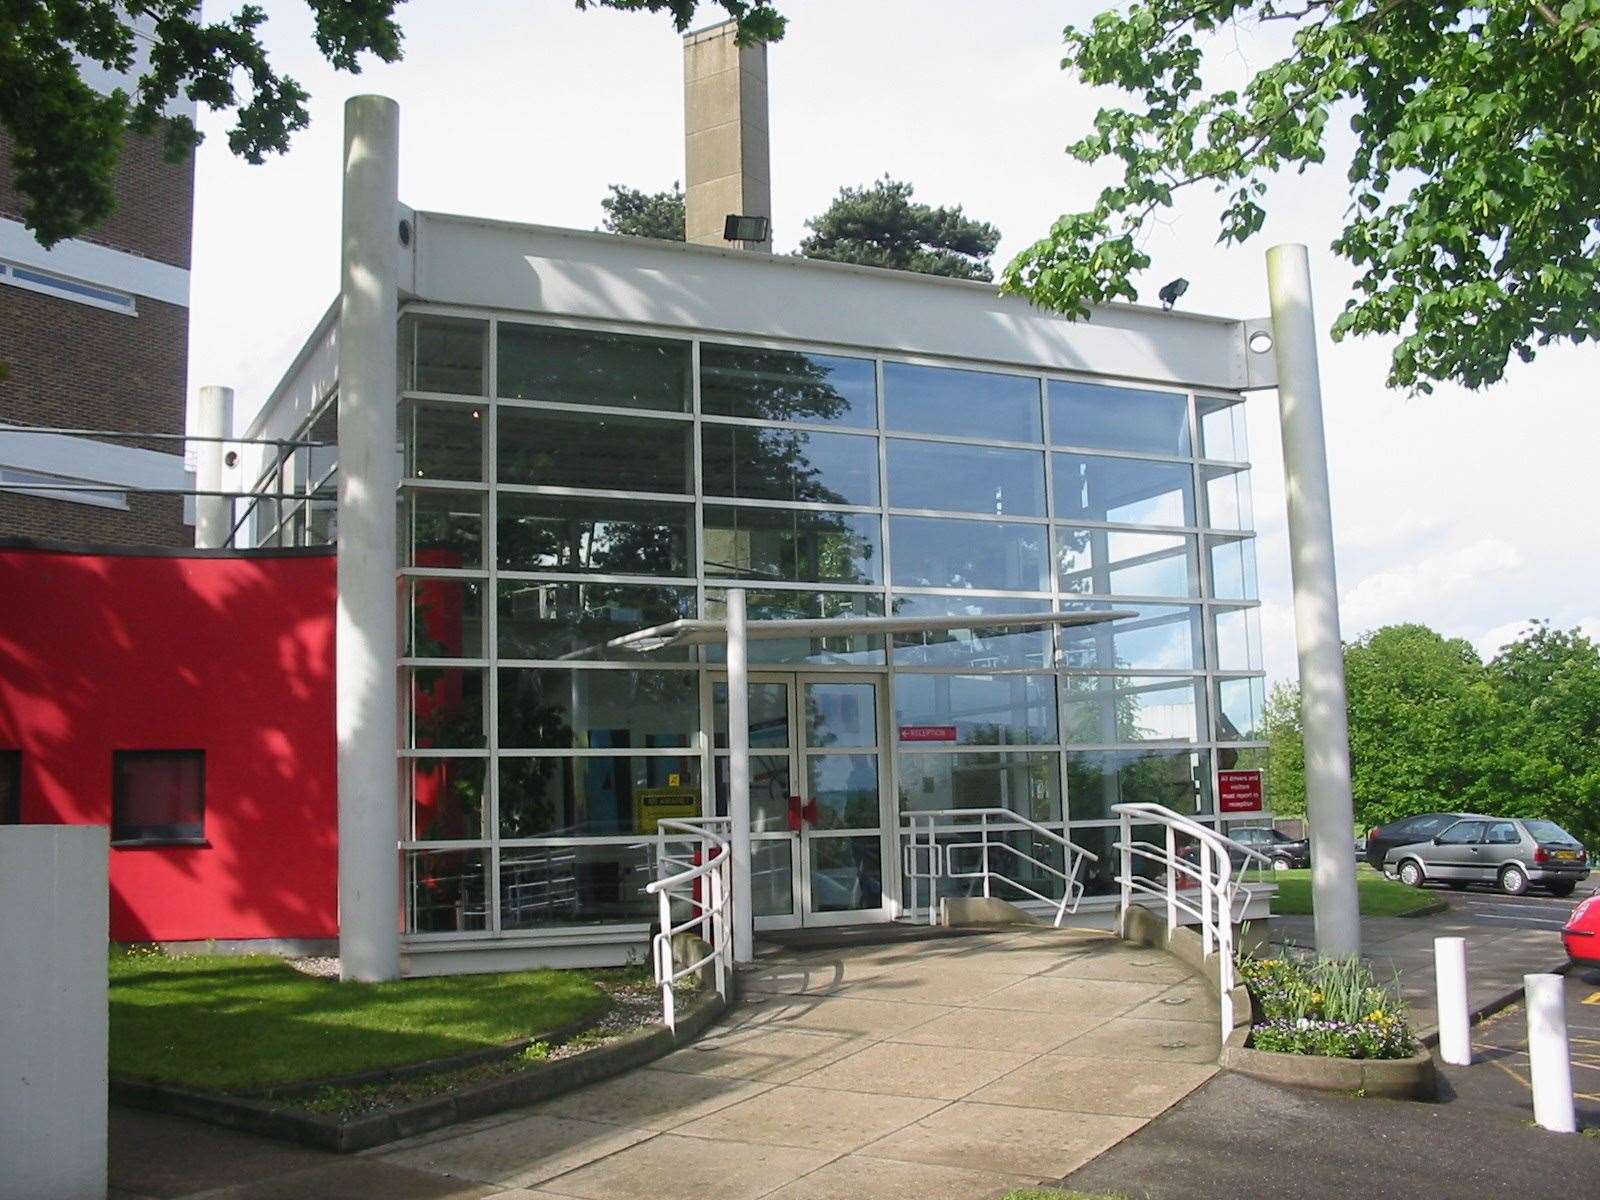 University College for the Creative Arts, Oakwood Park, Maidstone, in 2006